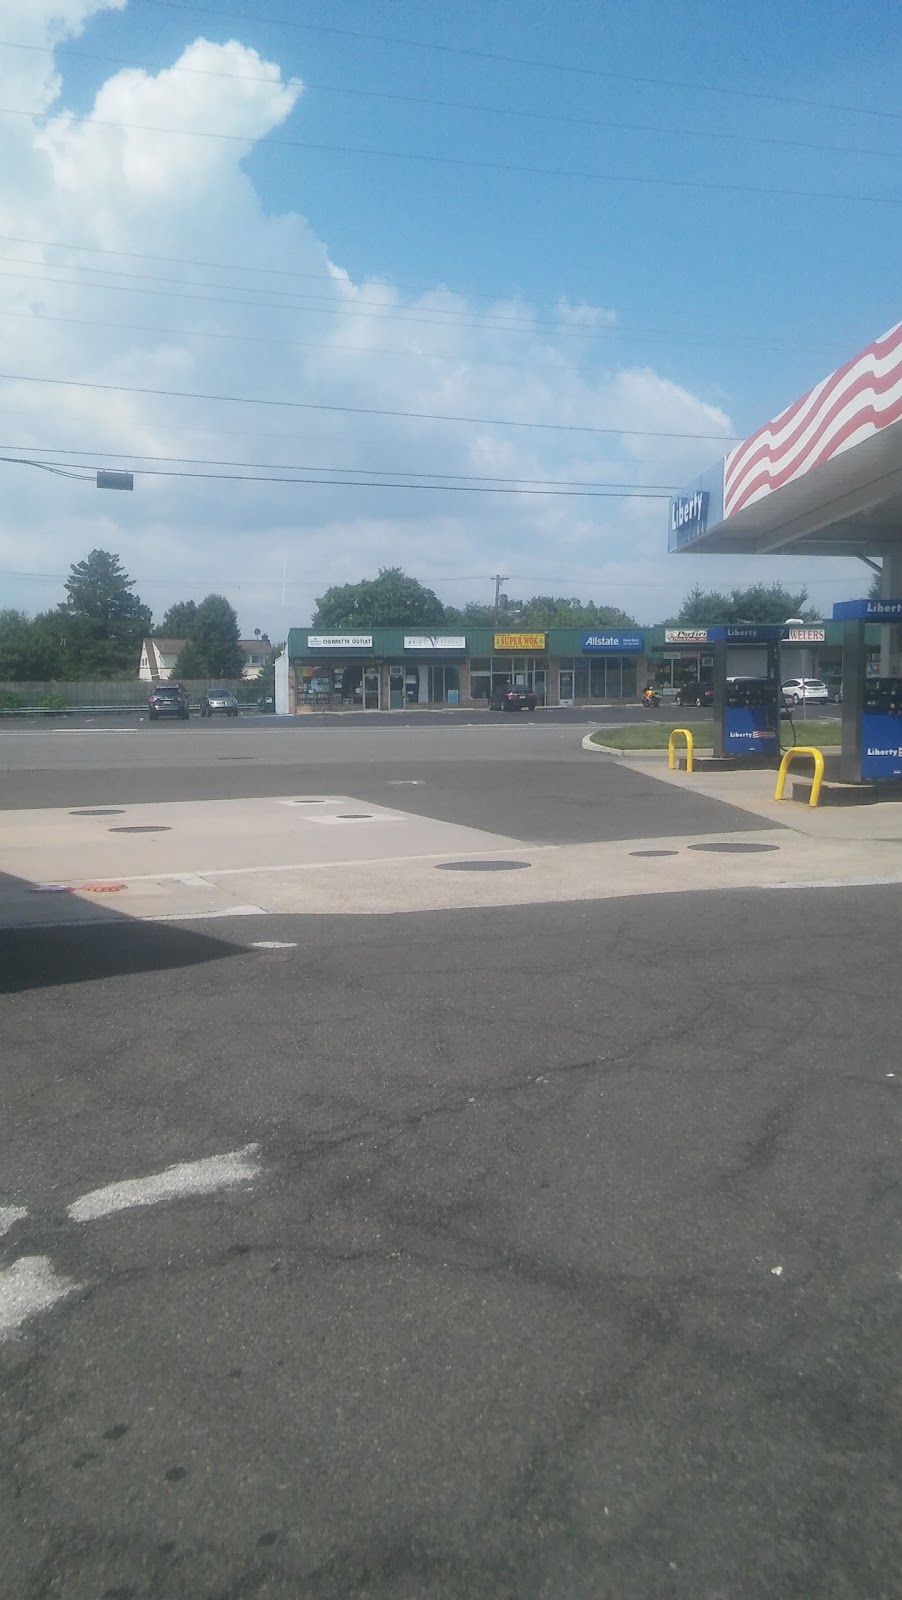 Carvers Liberty Auto Repair and Fuel station | Veterans high way and, 1724 Trenton Rd, Levittown, PA 19056 | Phone: (215) 945-2150